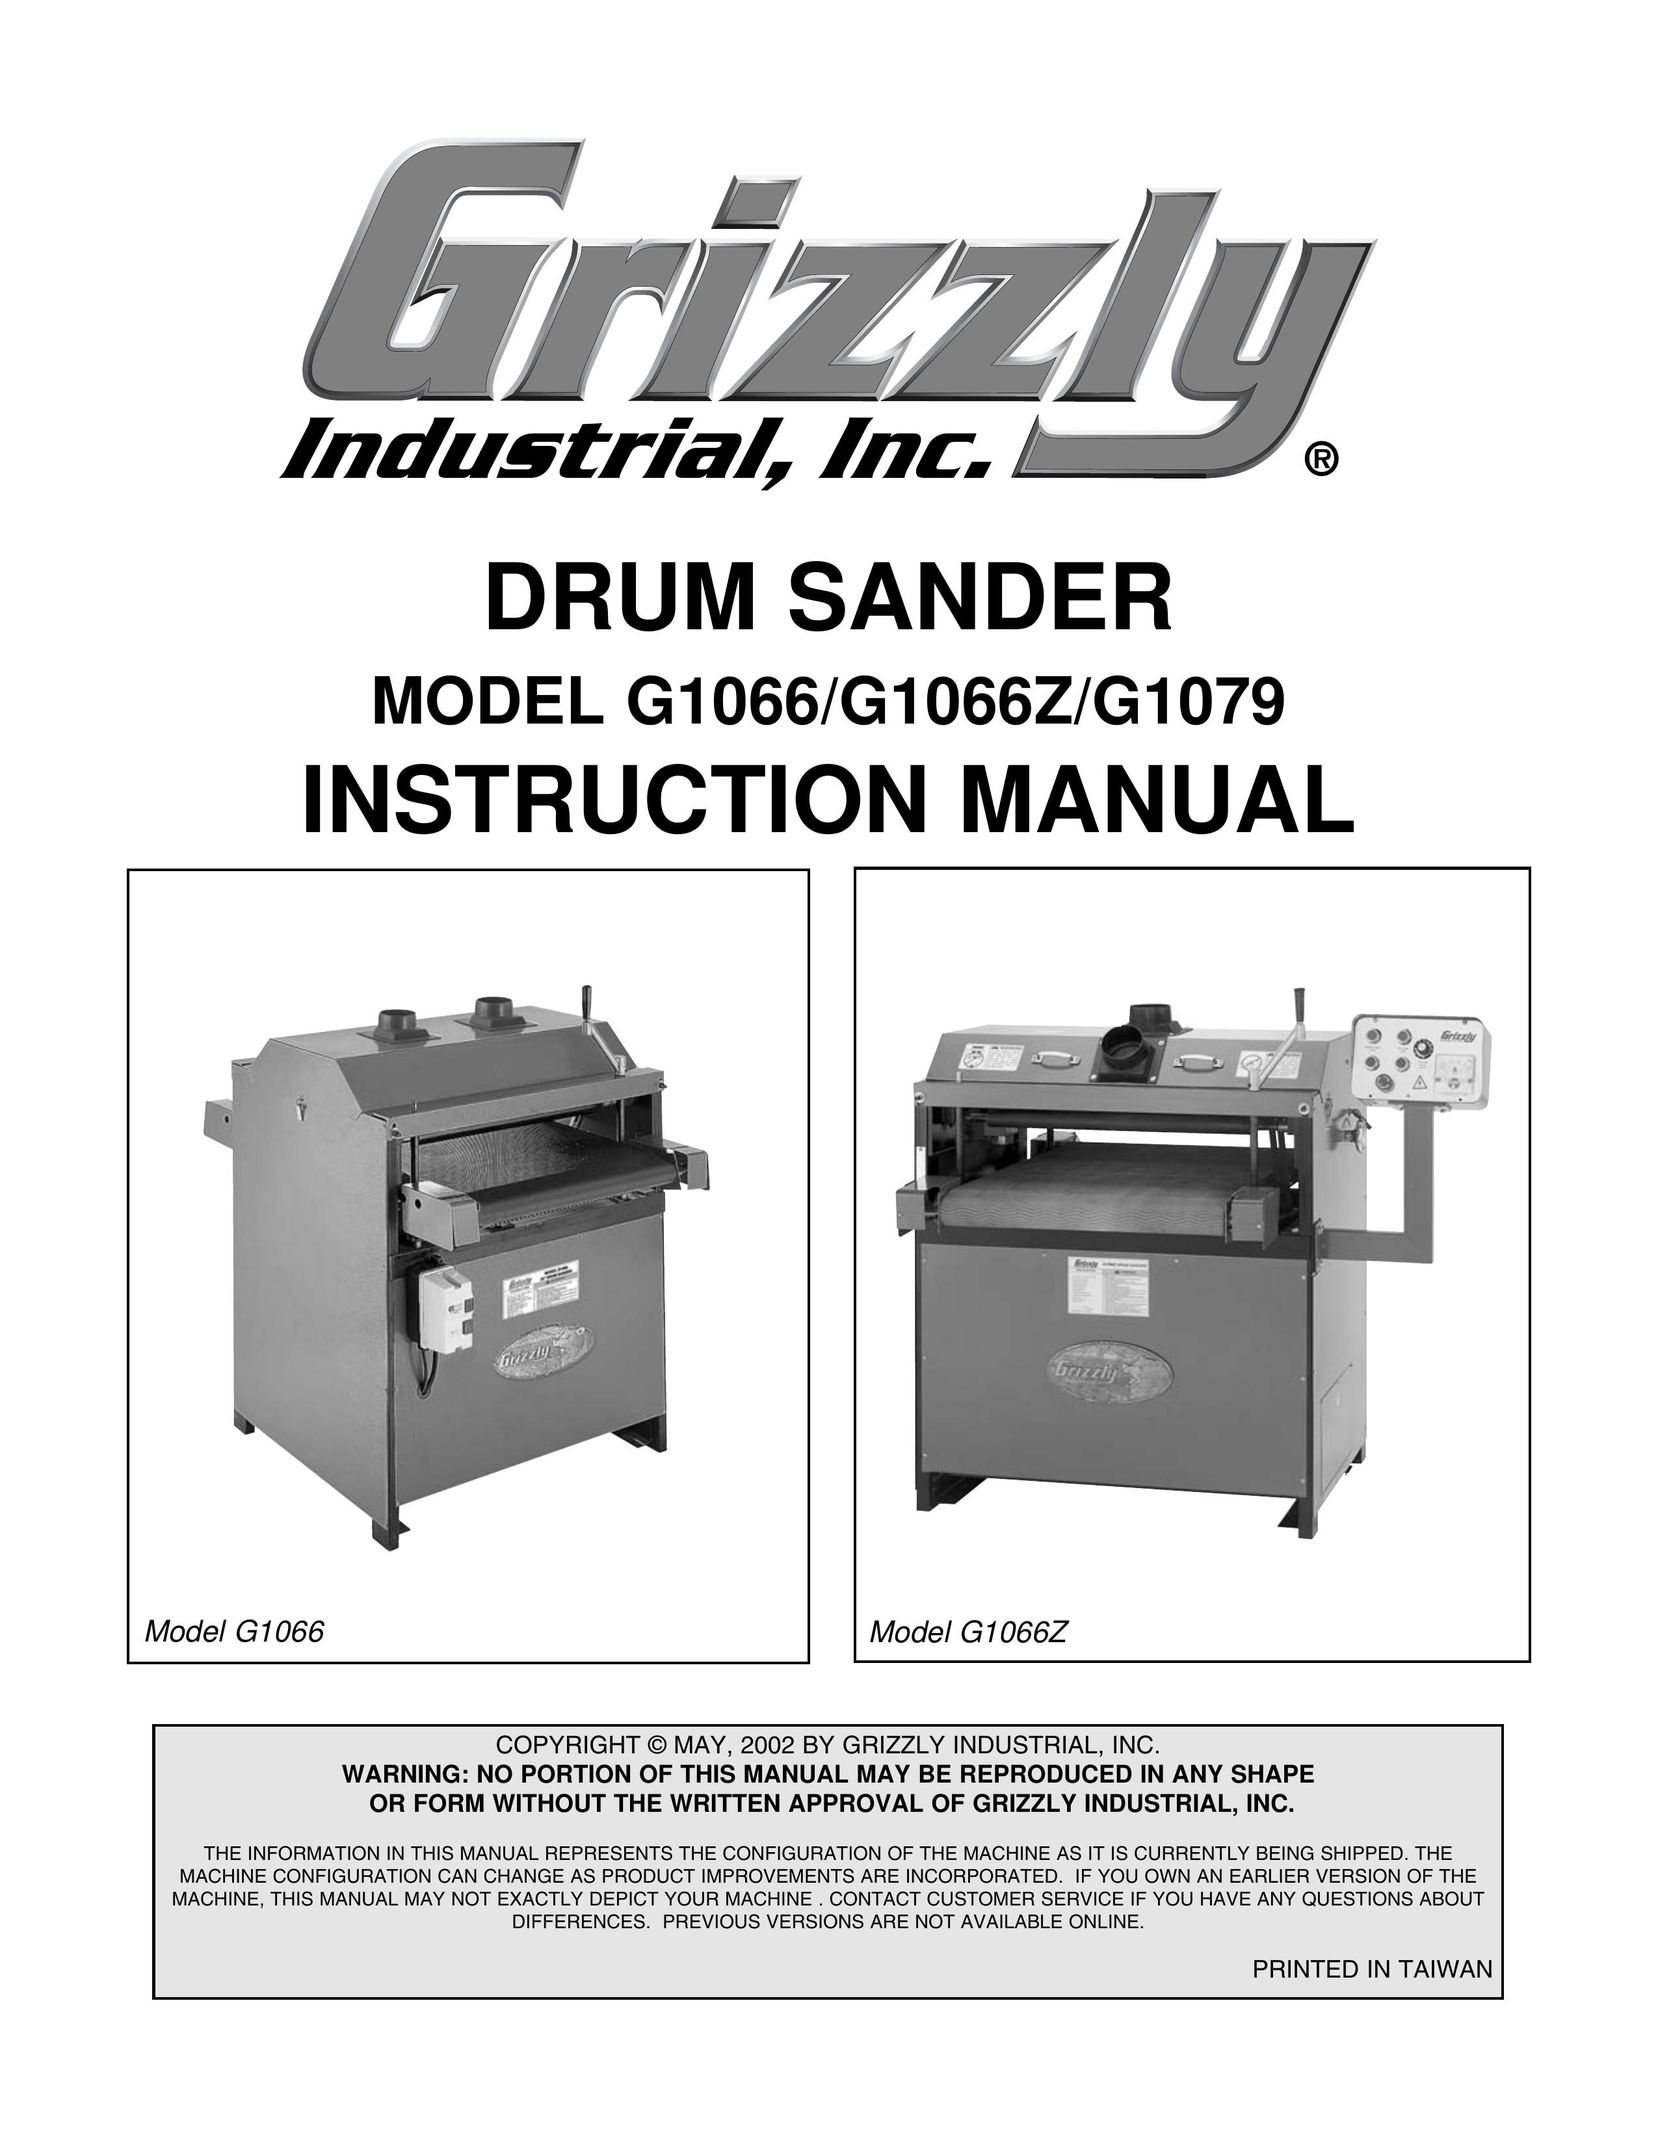 Grizzly G1066 Sander User Manual